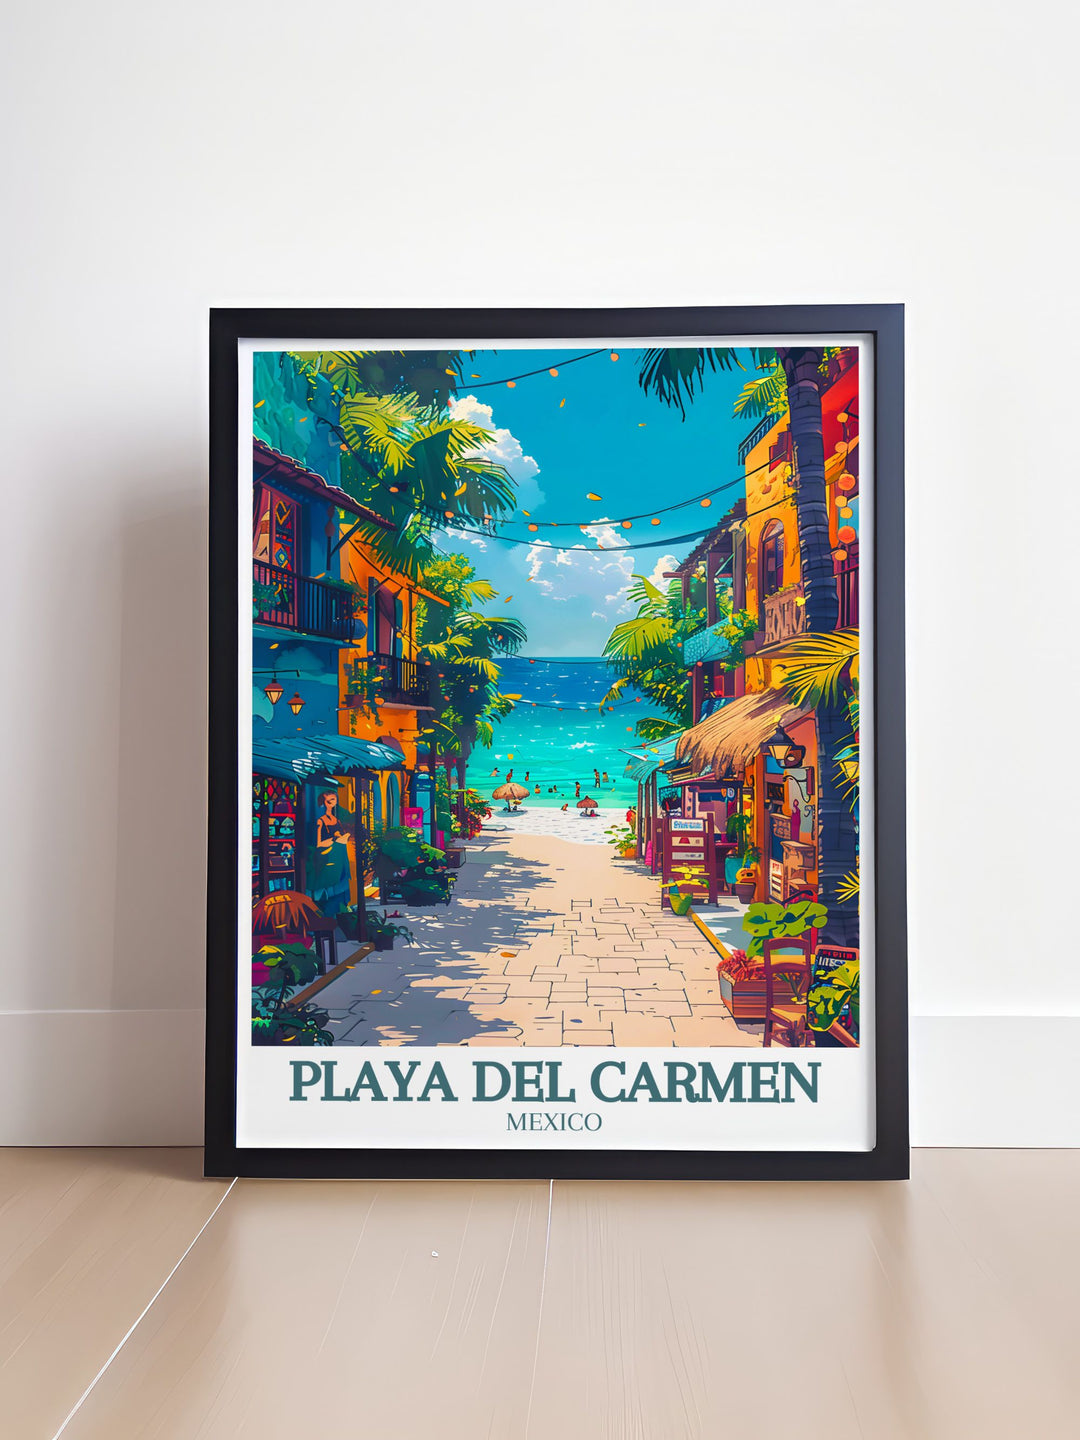 Breathtaking Playa Carmen print capturing the essence of La Quinta Avenida and the Caribbean Sea ideal for adding tropical beauty to your home decor and a thoughtful gift for travelers.